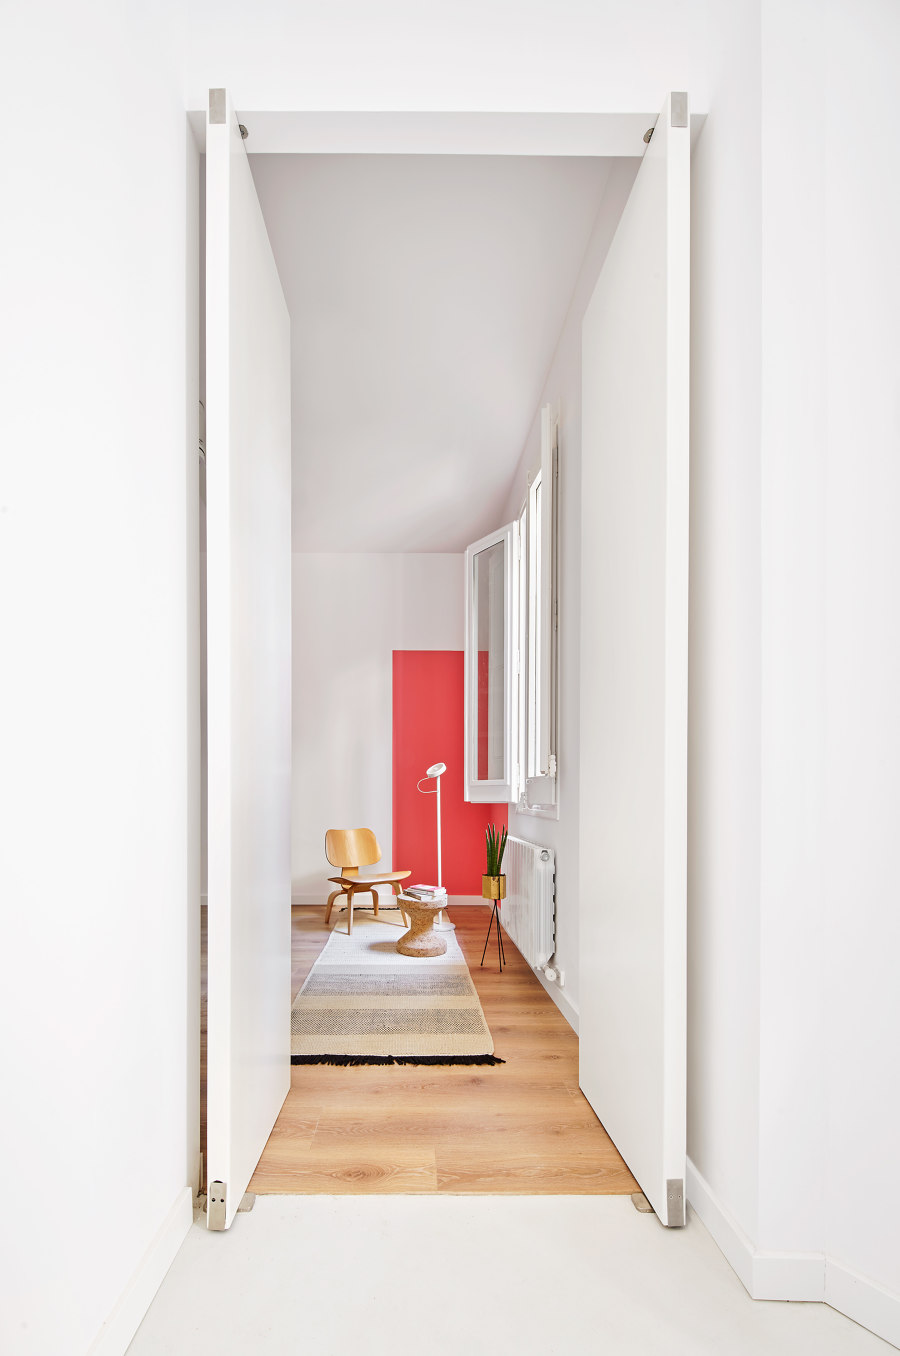 The Magic Box Apartment by Raul Sanchez Architects | Living space